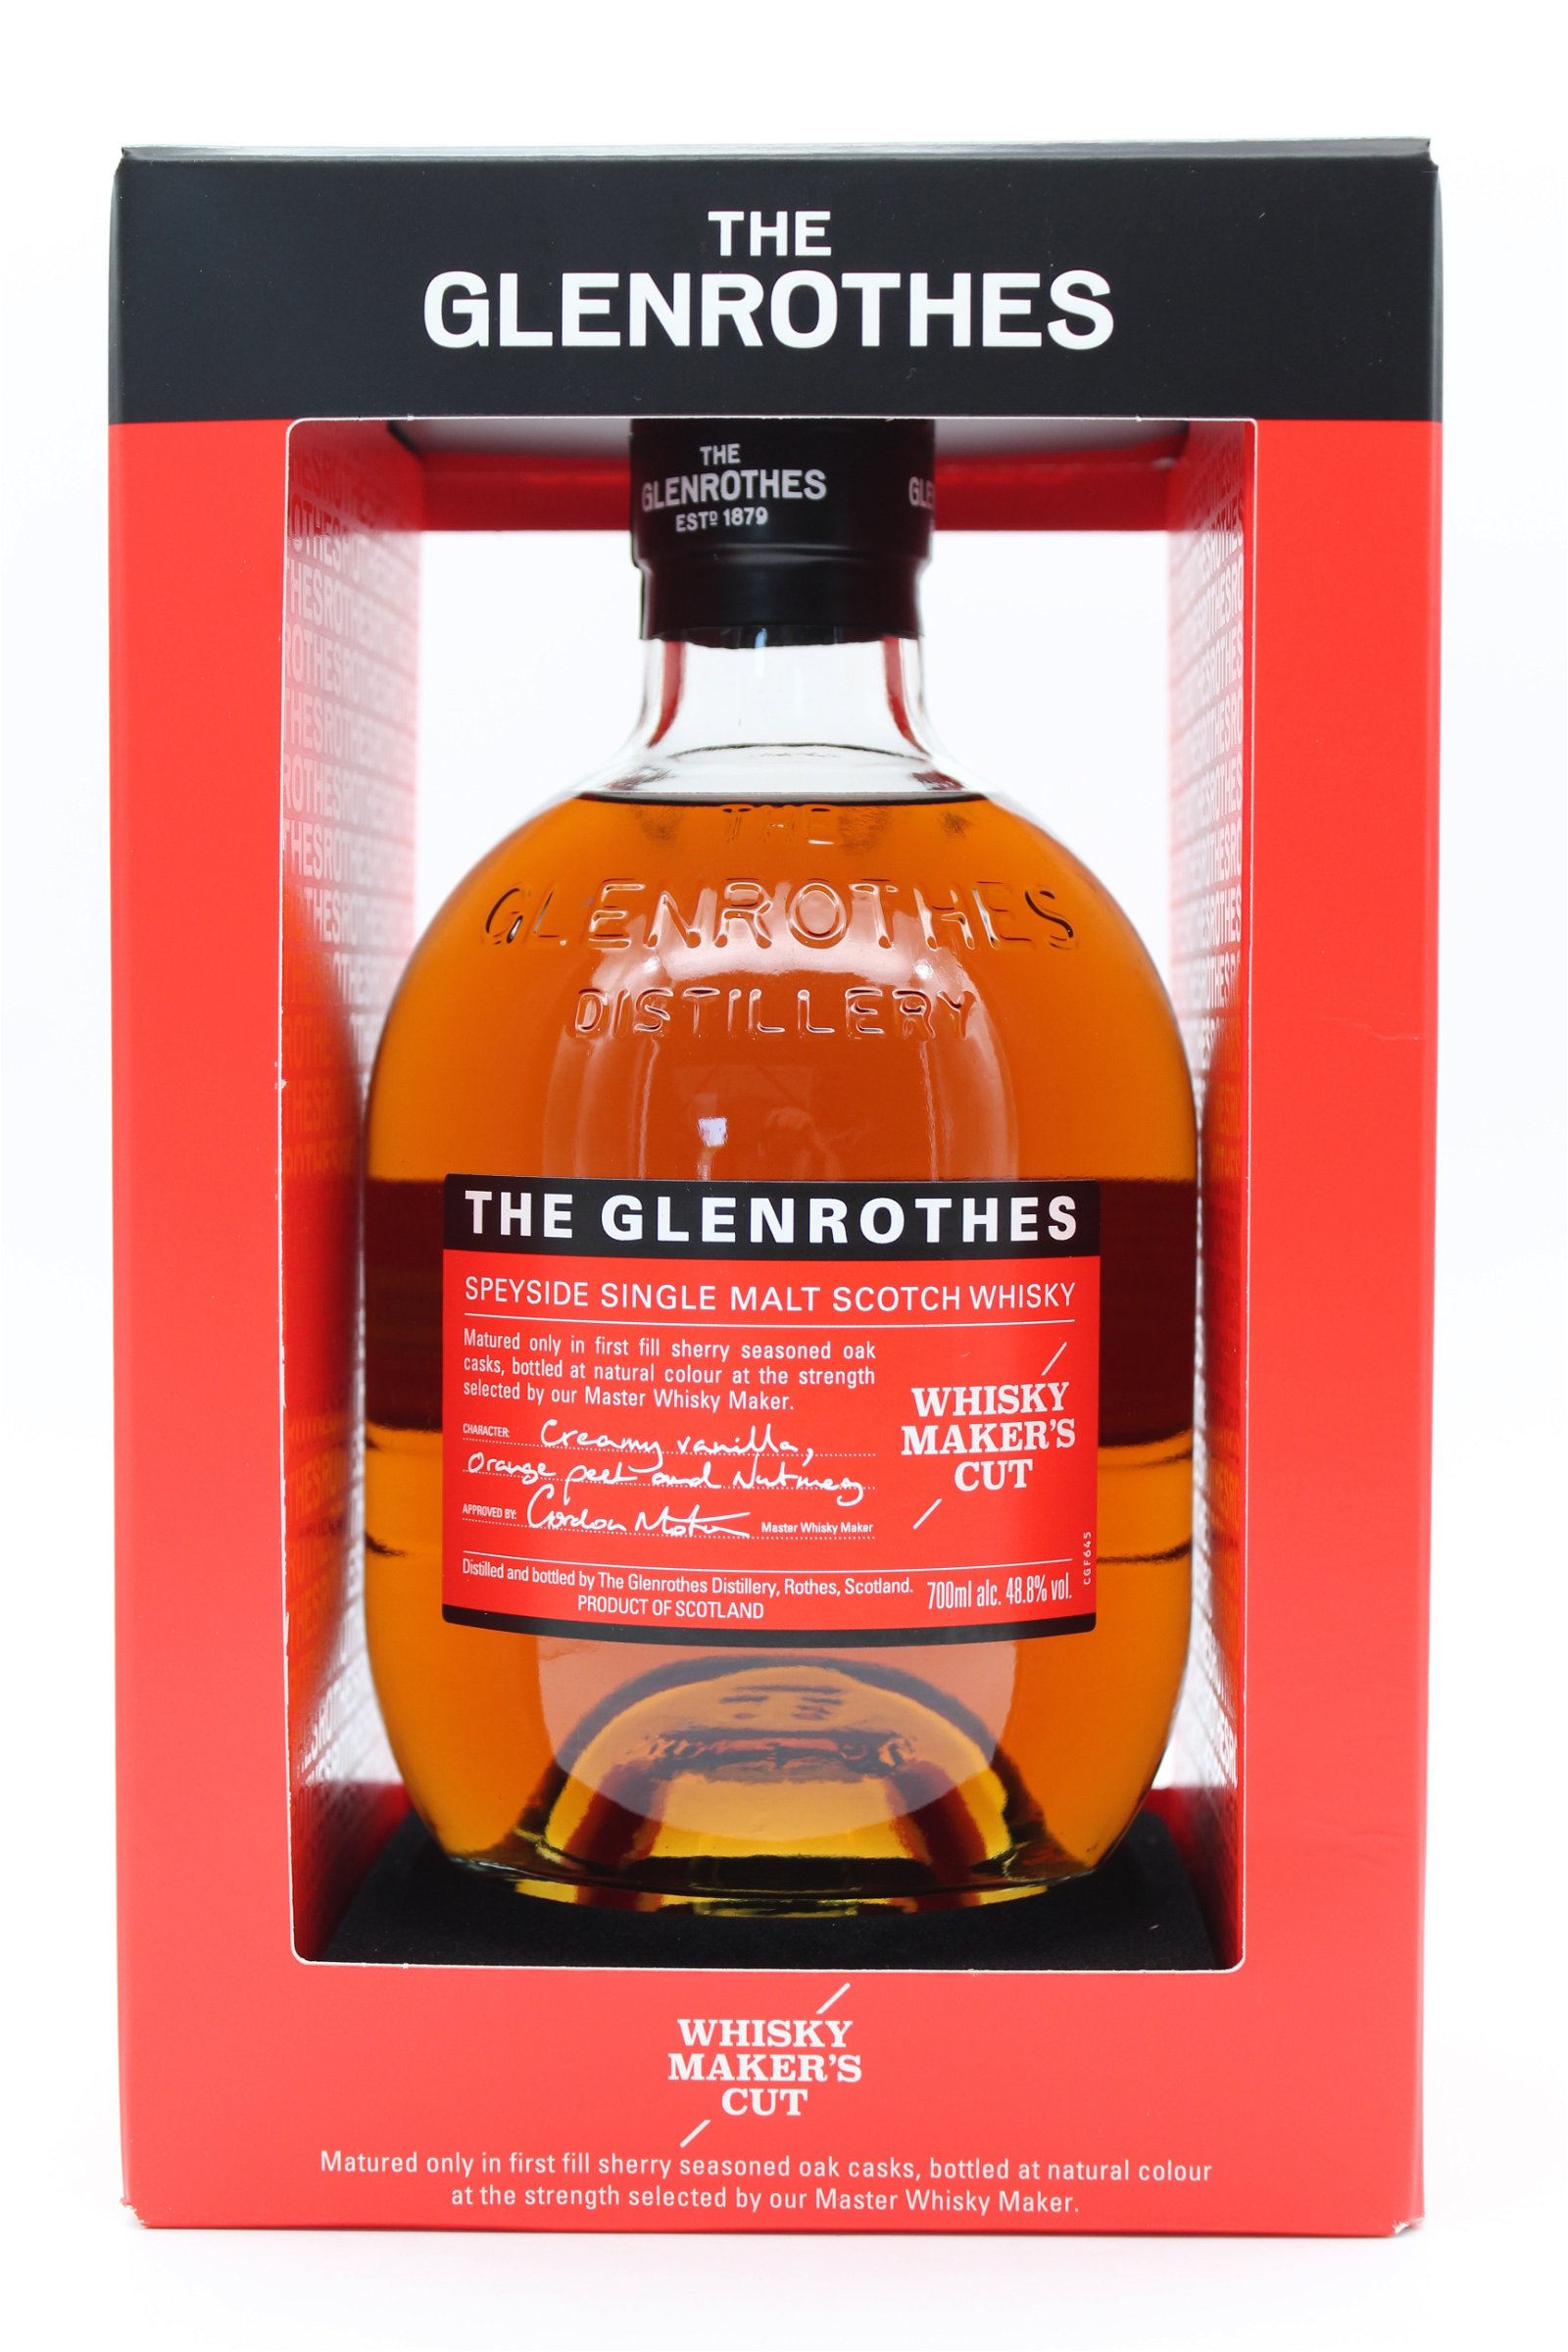 The Glenrothes Makers Cut Single Malt Scotch Whisky